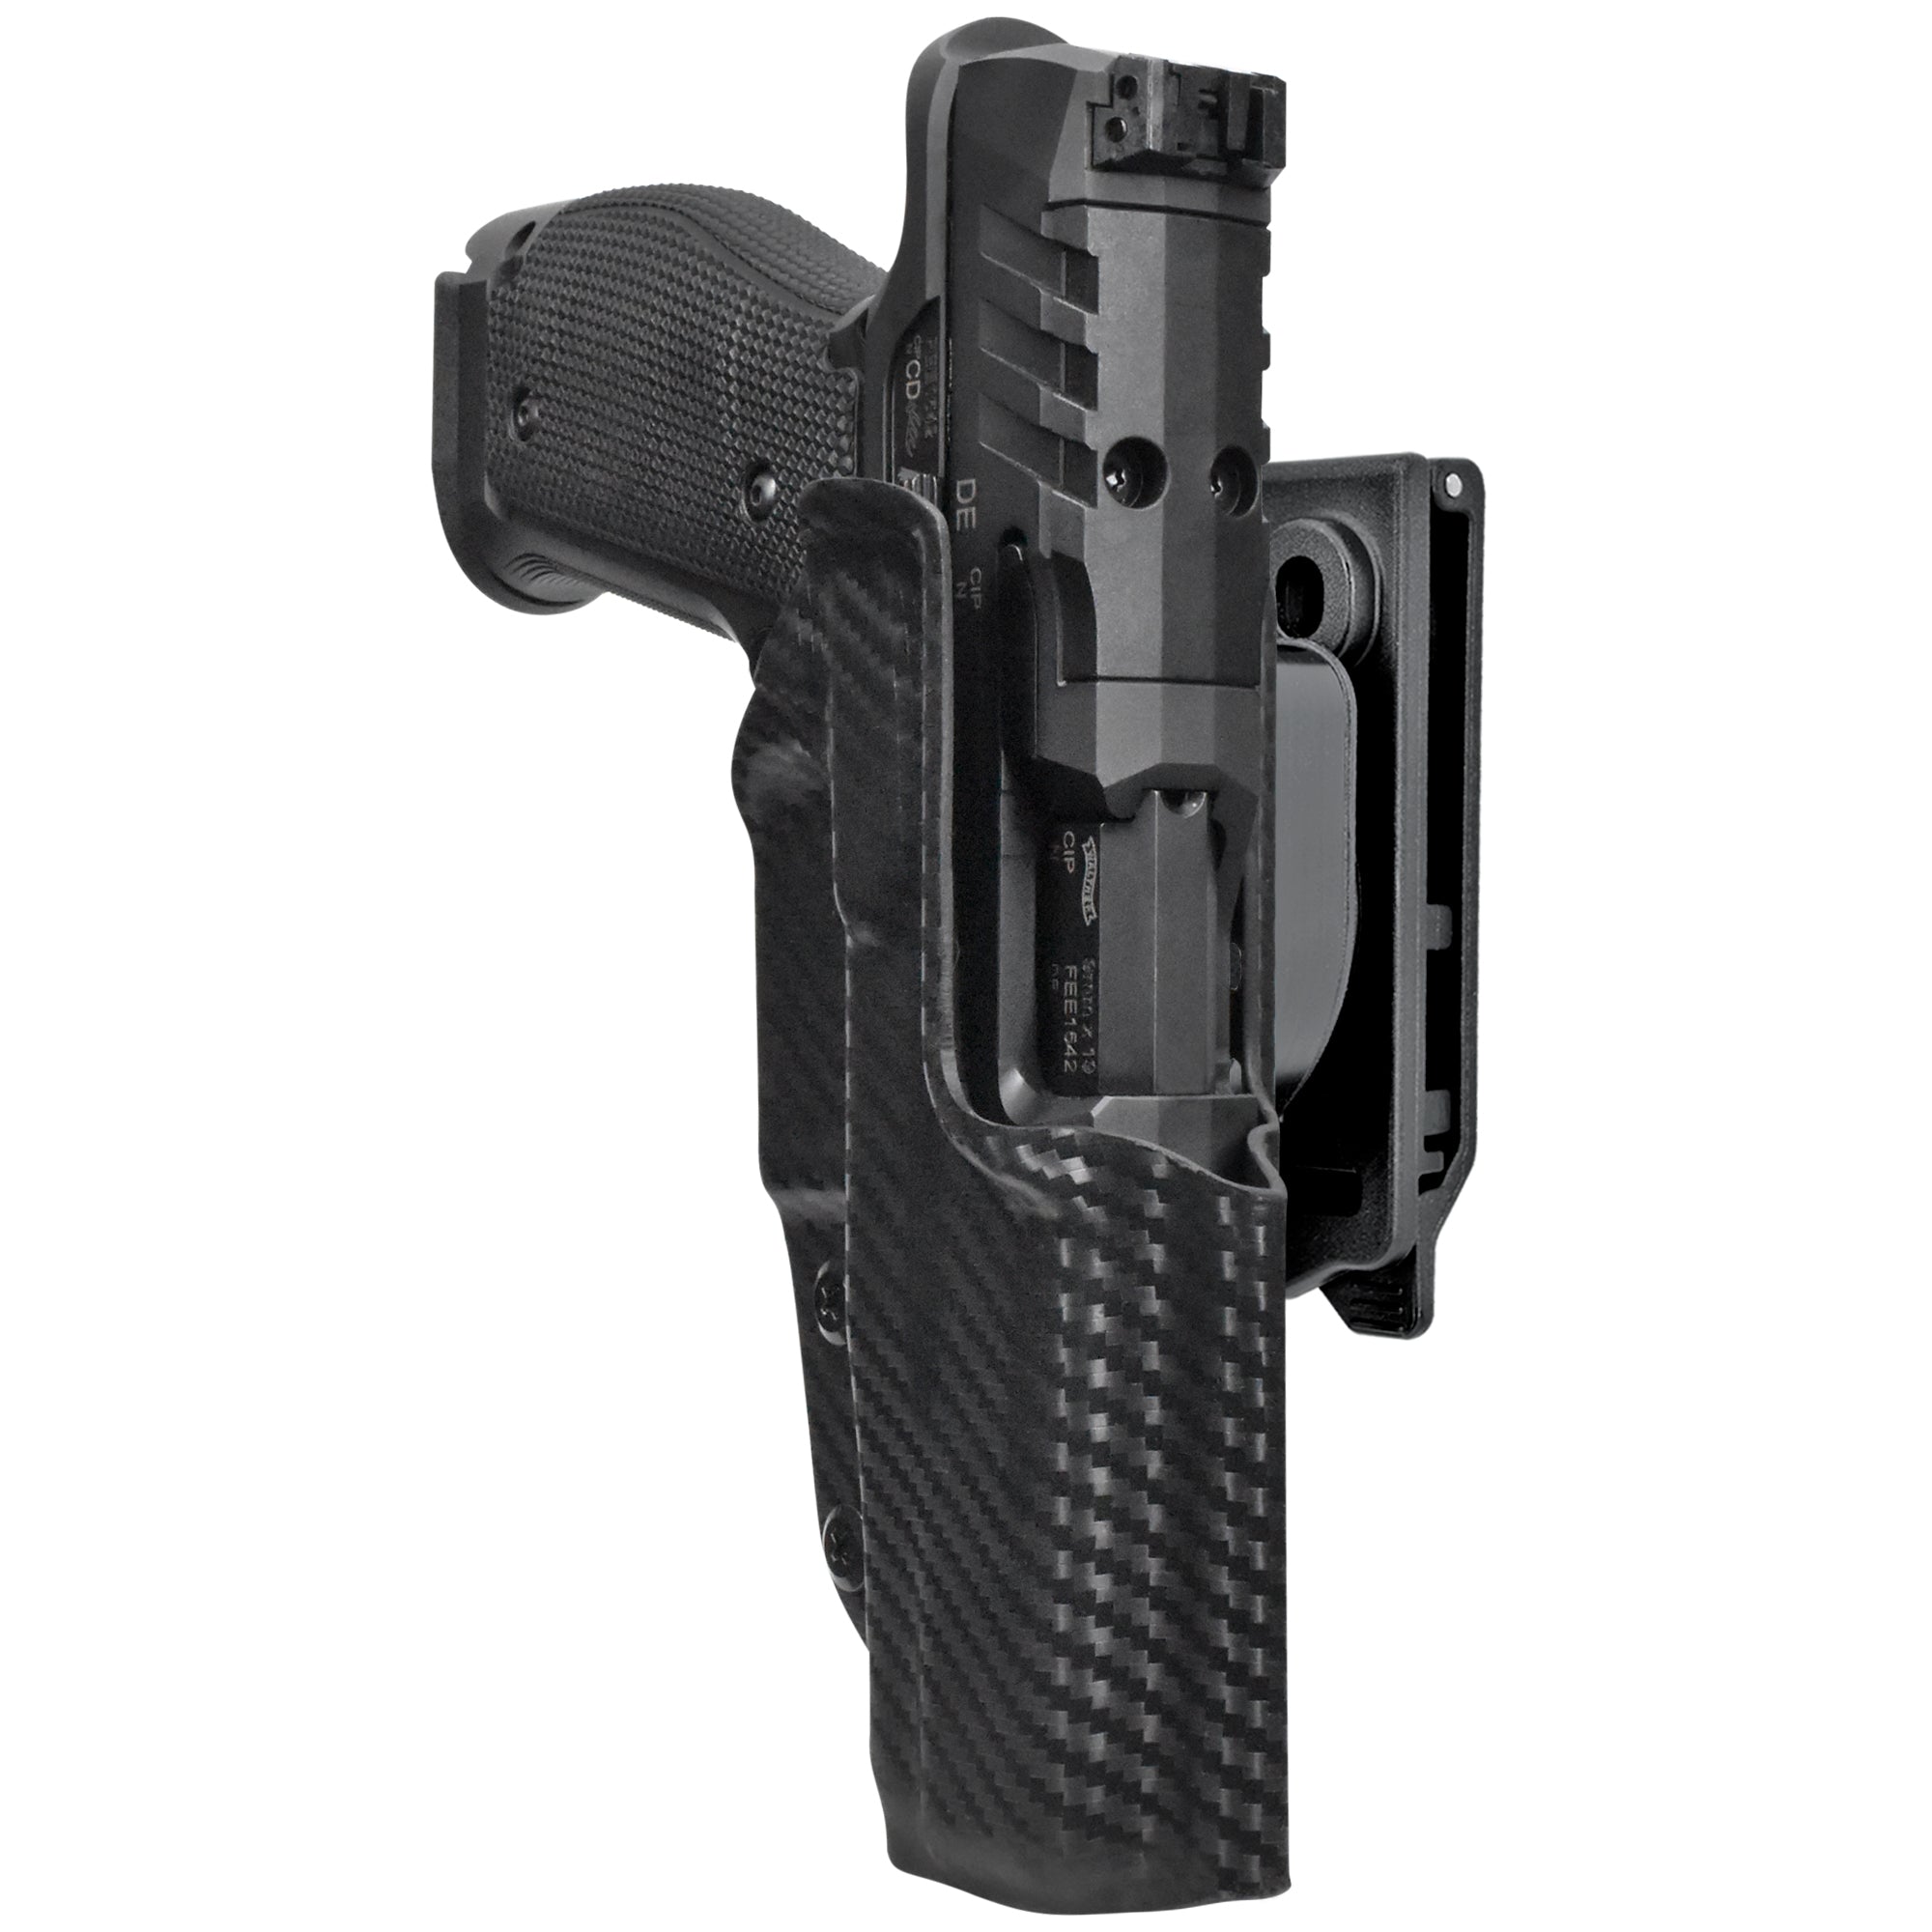 Quick Release IDPA Holster in Carbon Fiber